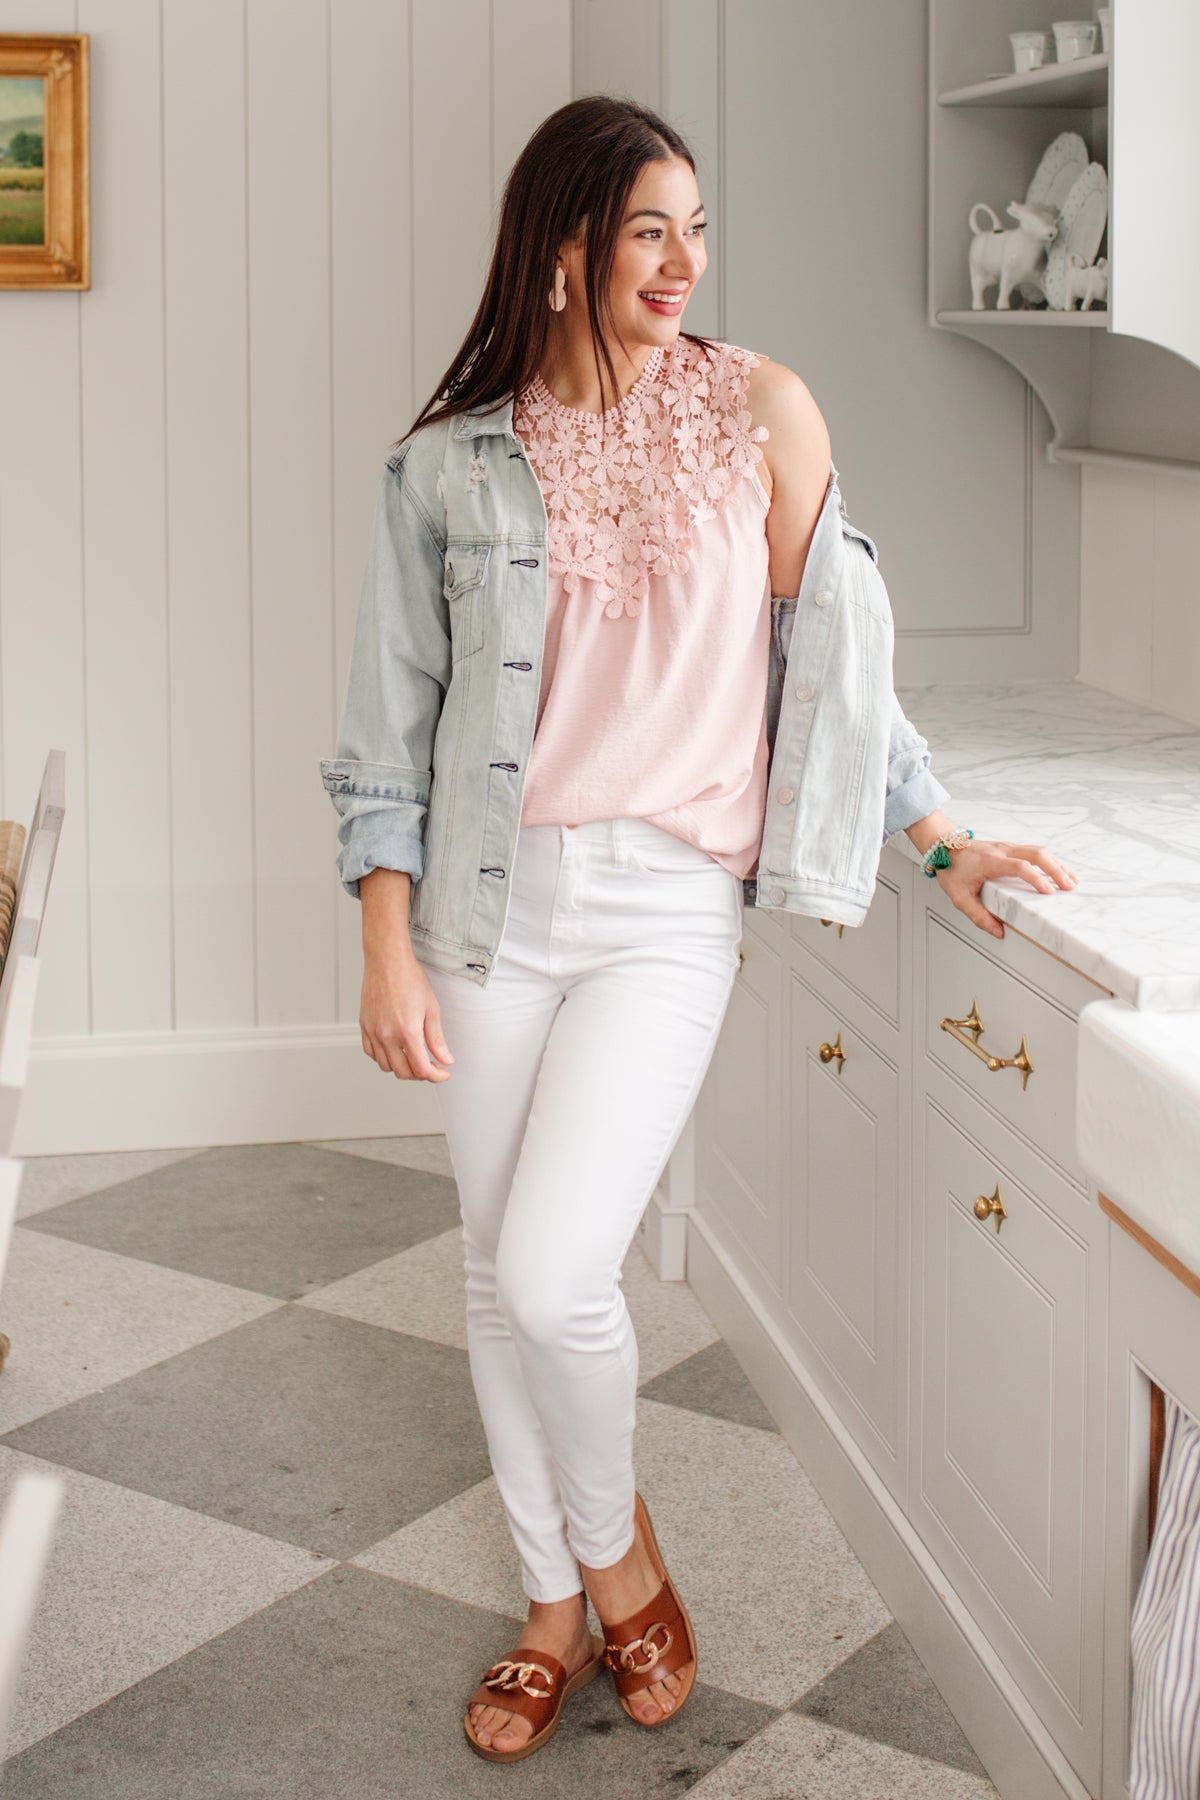 Spring has Sprung Top in Pink, SMALL left!